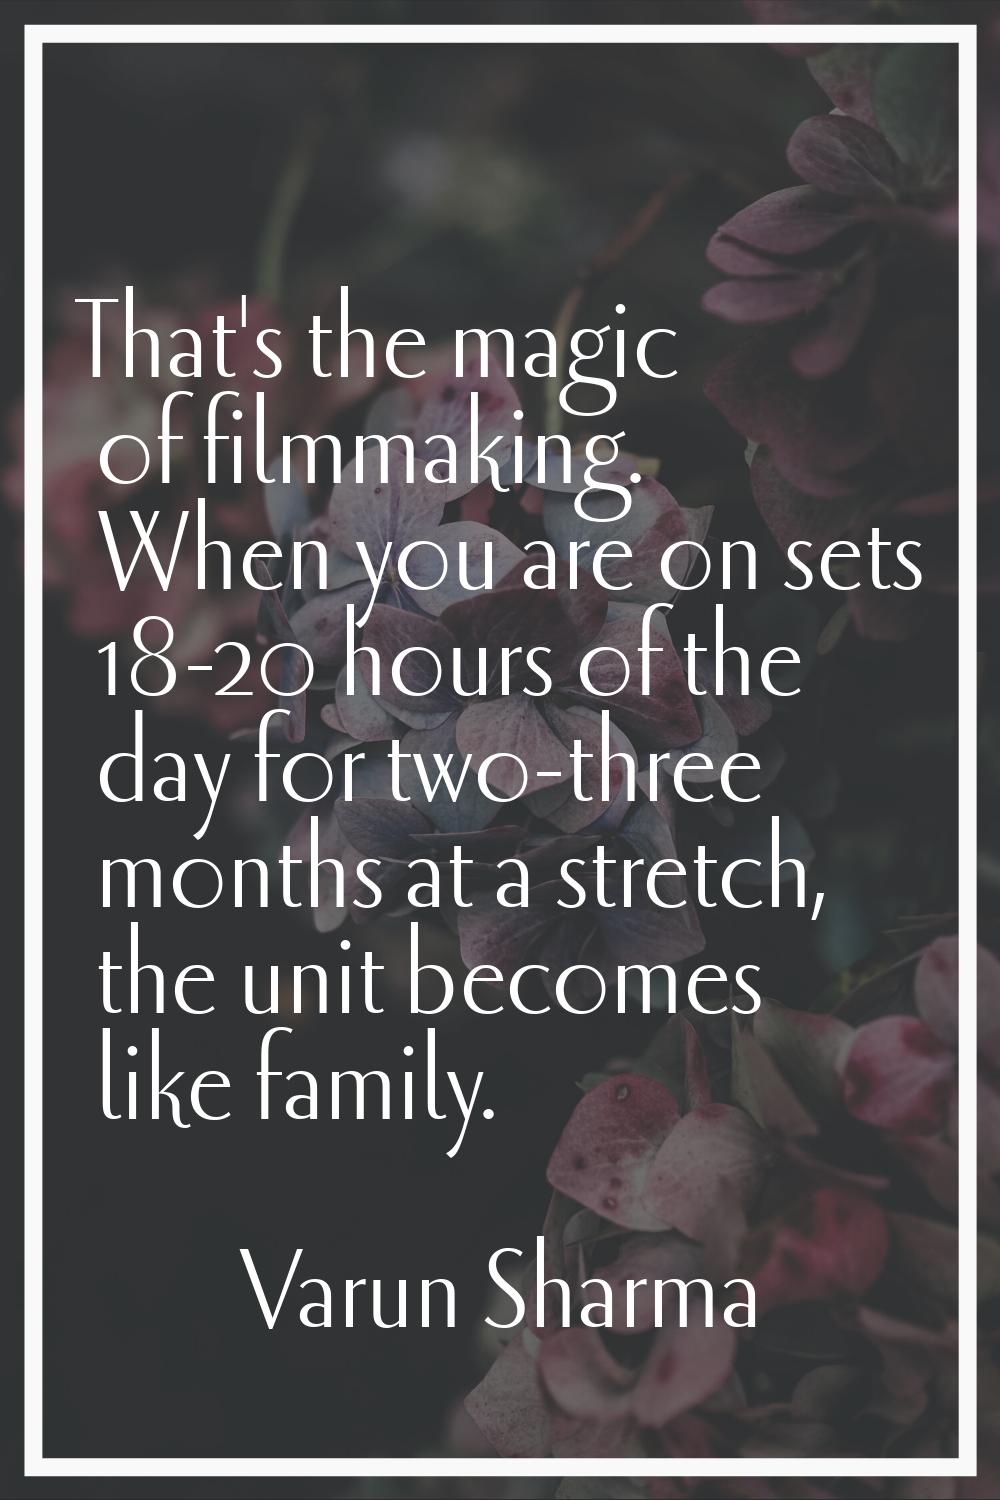 That's the magic of filmmaking. When you are on sets 18-20 hours of the day for two-three months at